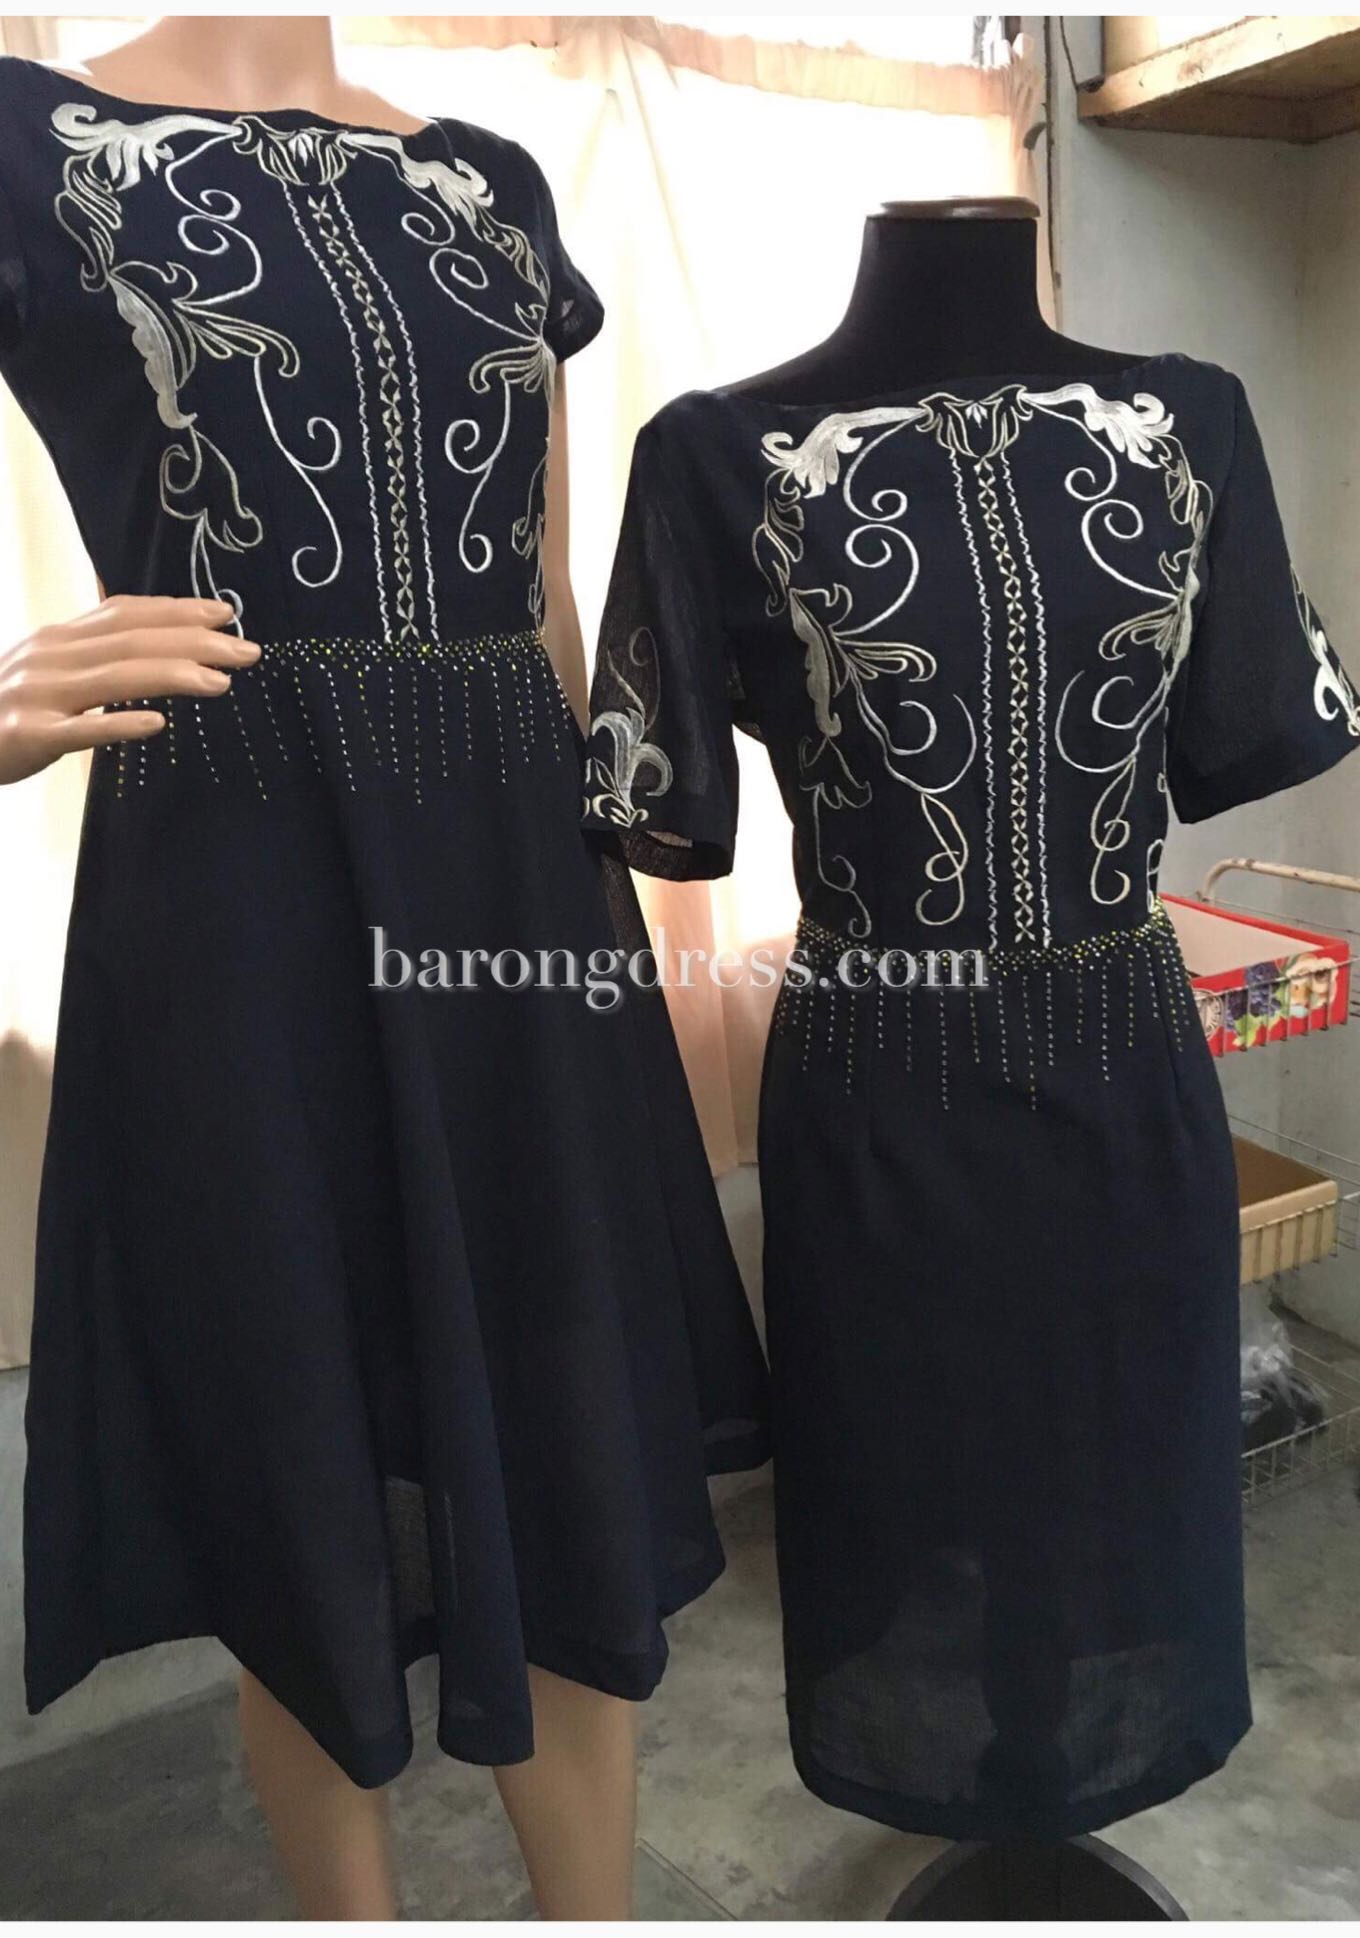 barong dress design for ladies